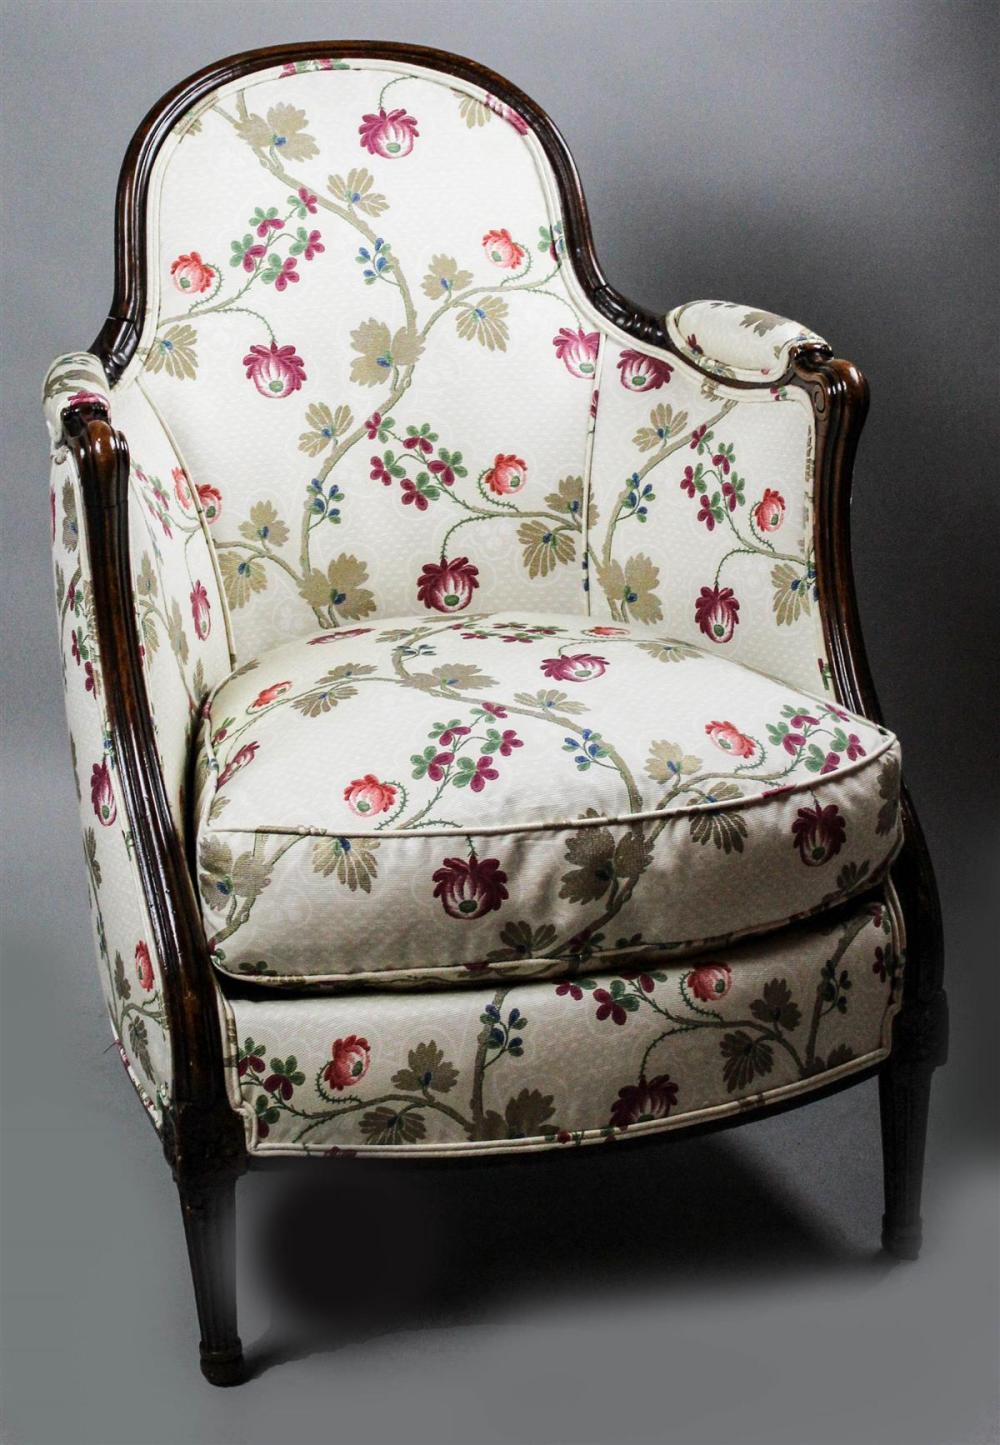 SMALL LOUIS XVI STYLE BERGERE WITH 313ced